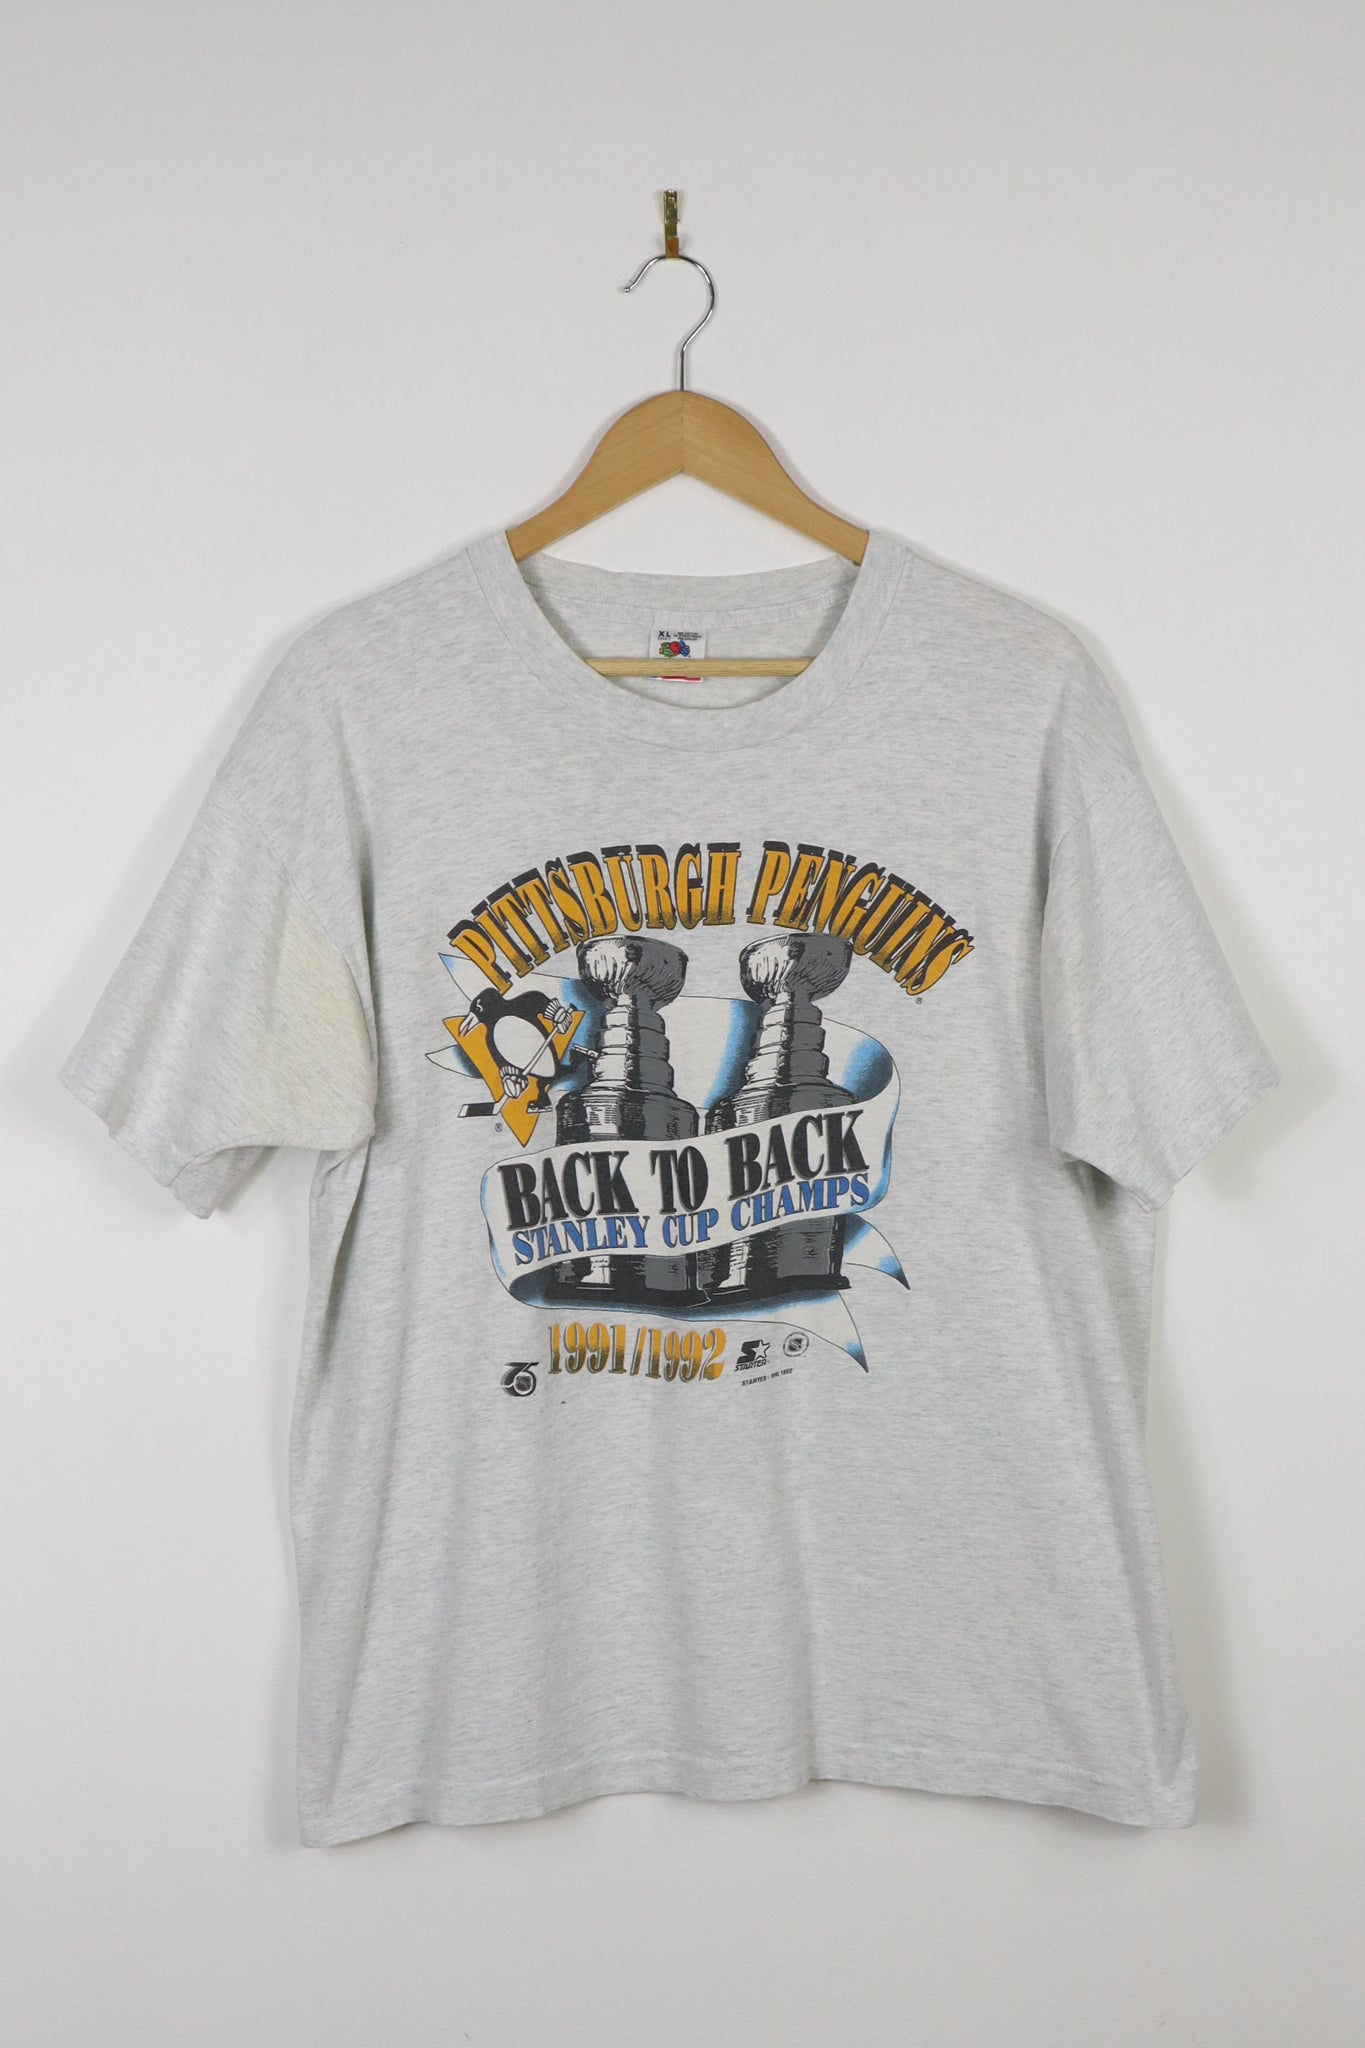 Pittsburgh Penguins Back to Back Stanley Cup Champions Tee